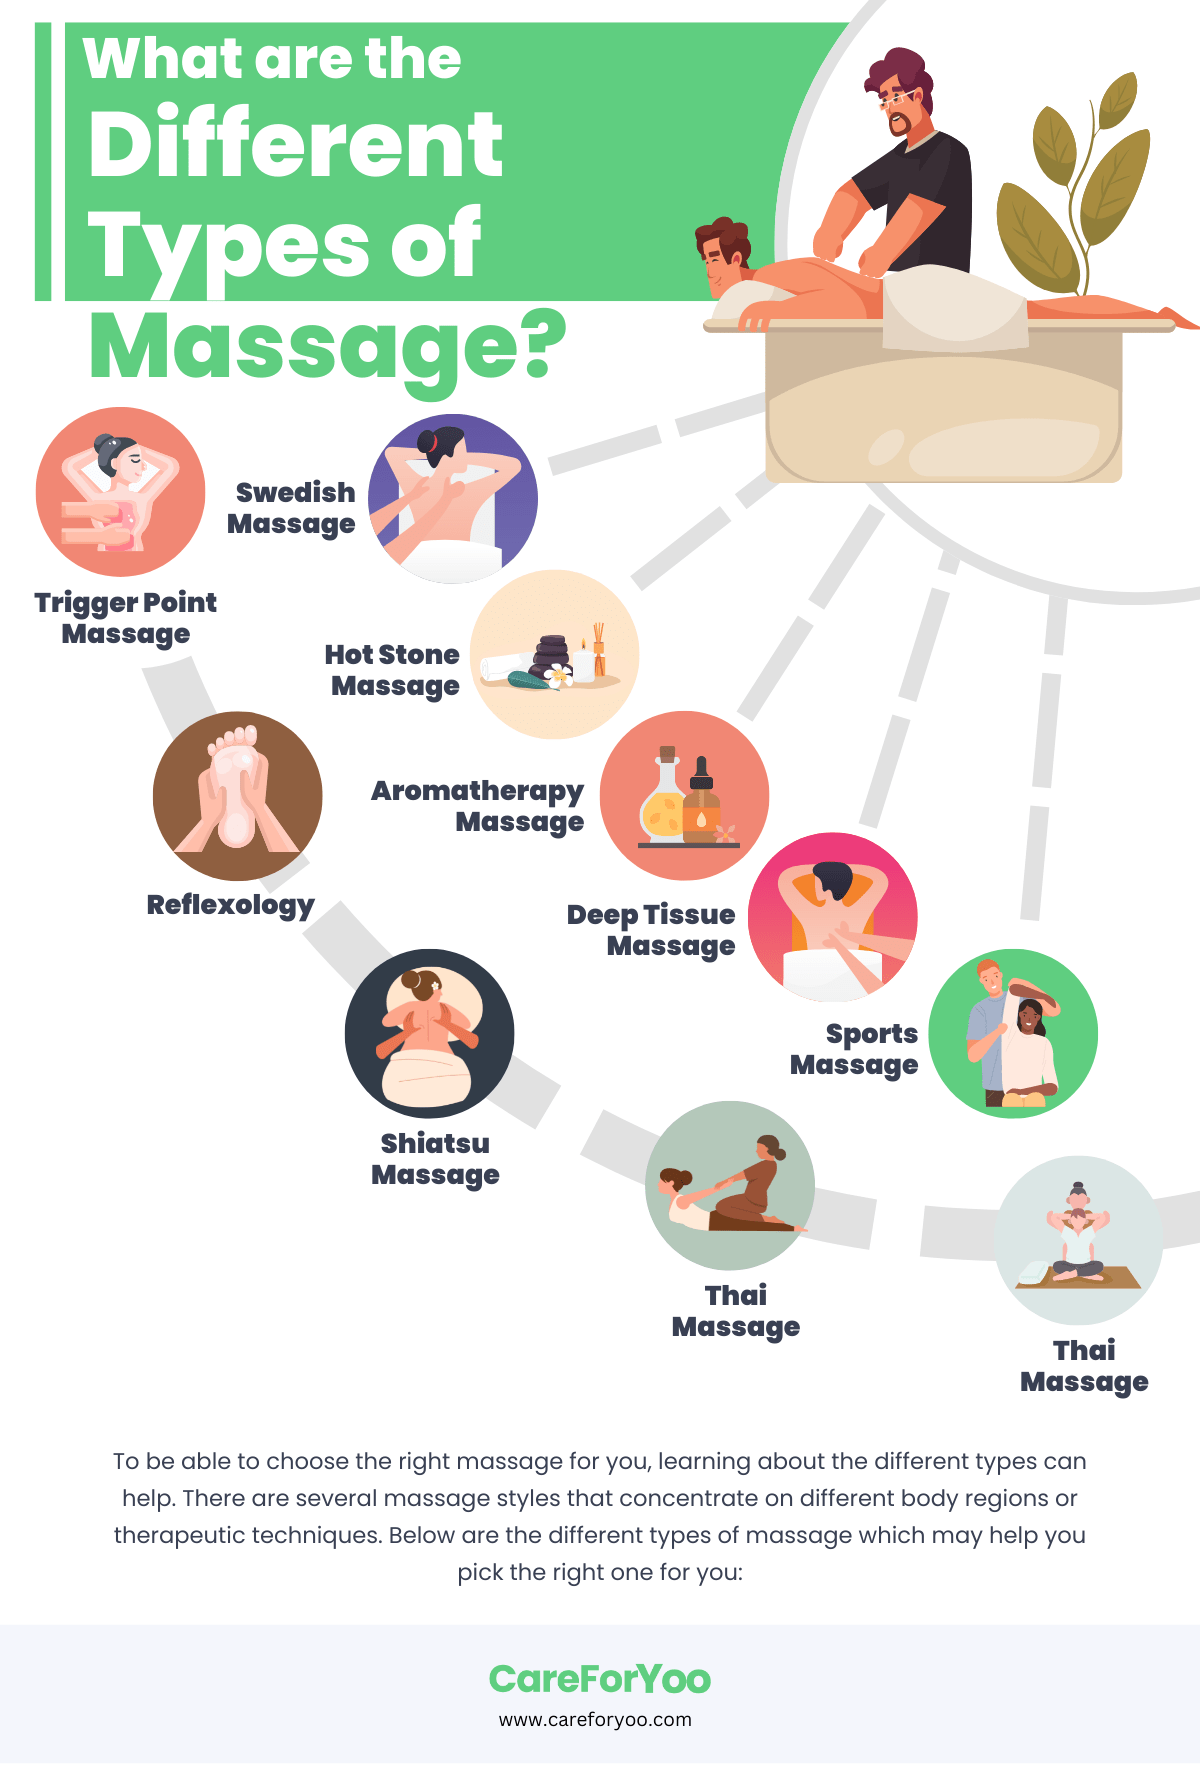 the different types of massage treatments